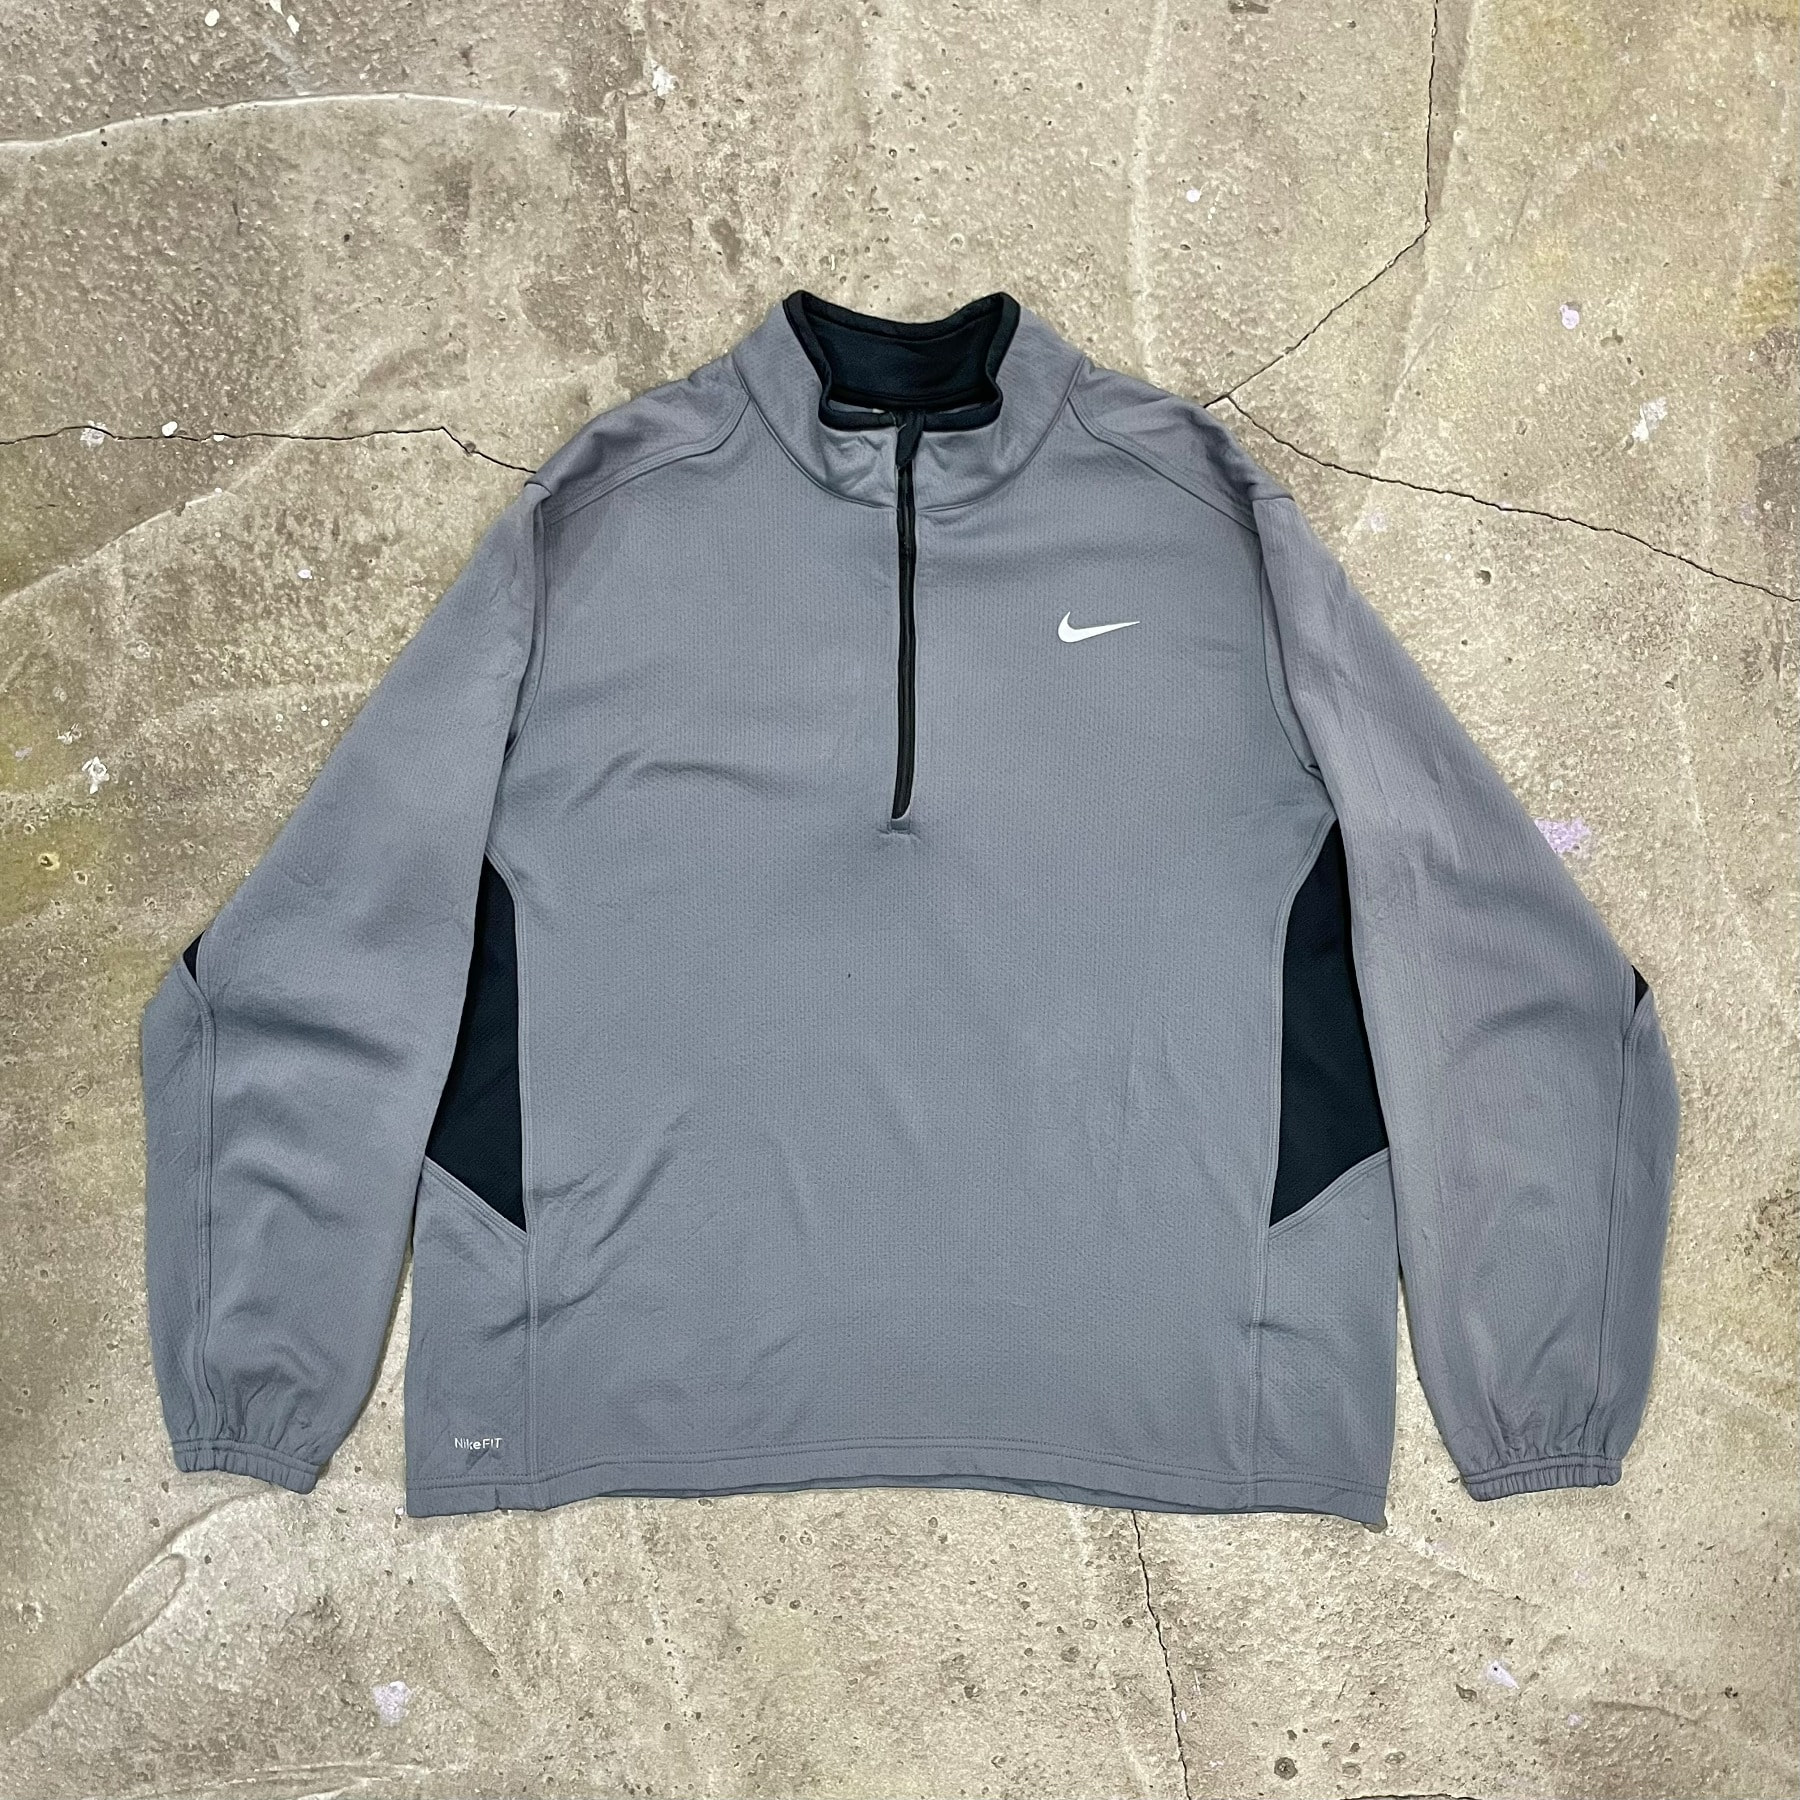 00&#039;s NIKE FIT DRY 1/4 Zip Mesh Pullover - XL